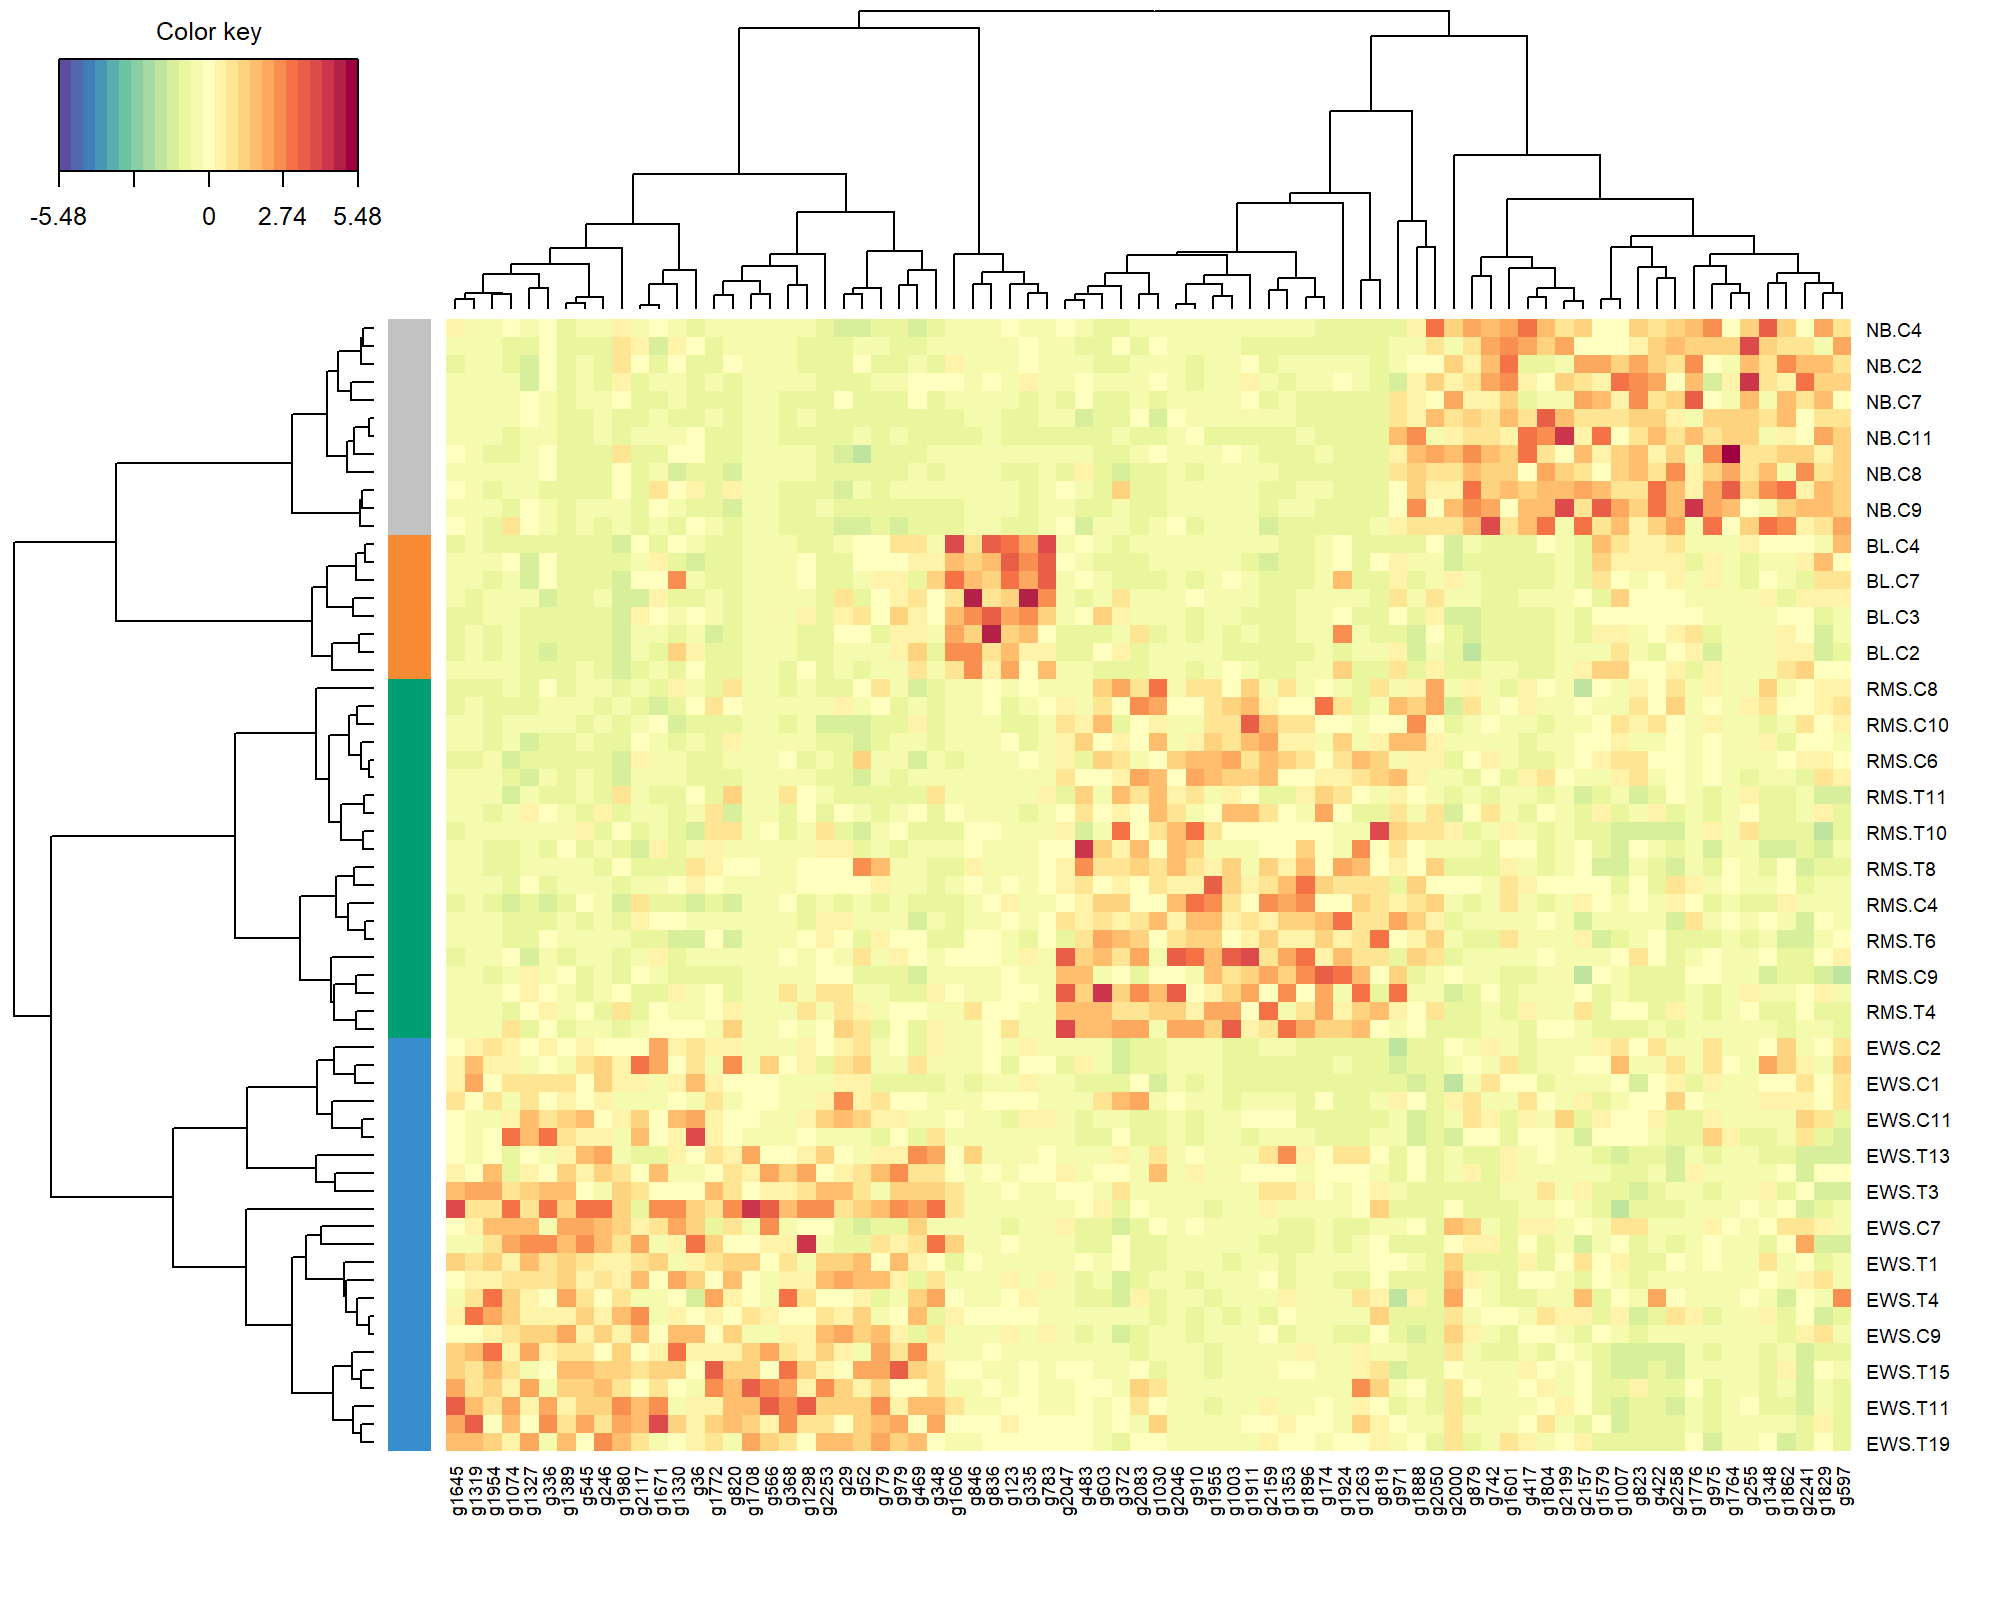 Clustered Image Map of the genes selected by sPLS-DA on the SRBCT gene expression data across all 3 components. A hierarchical clustering based on the gene expression levels of the selected genes, with samples in rows coloured according to their tumour subtype (using Euclidean distance with Complete agglomeration method). As expected, we observe a separation of all different tumour types, which are characterised by different levels of expression.